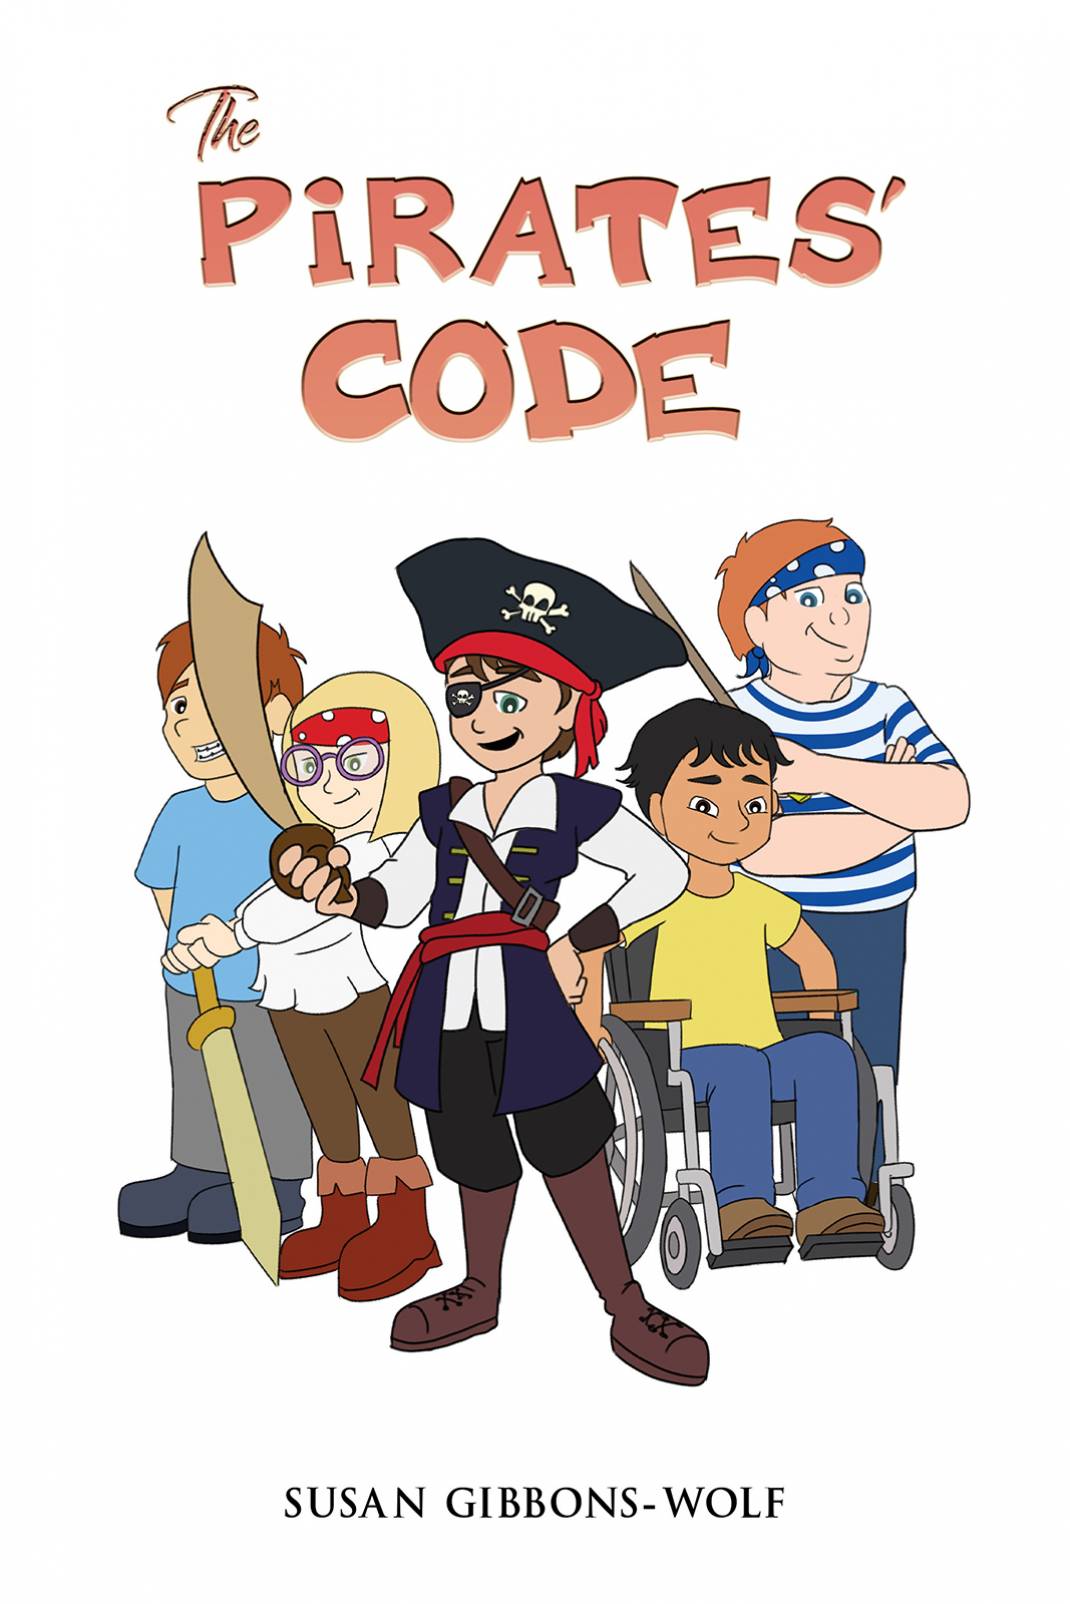 book cover - kids dressed up as pirates